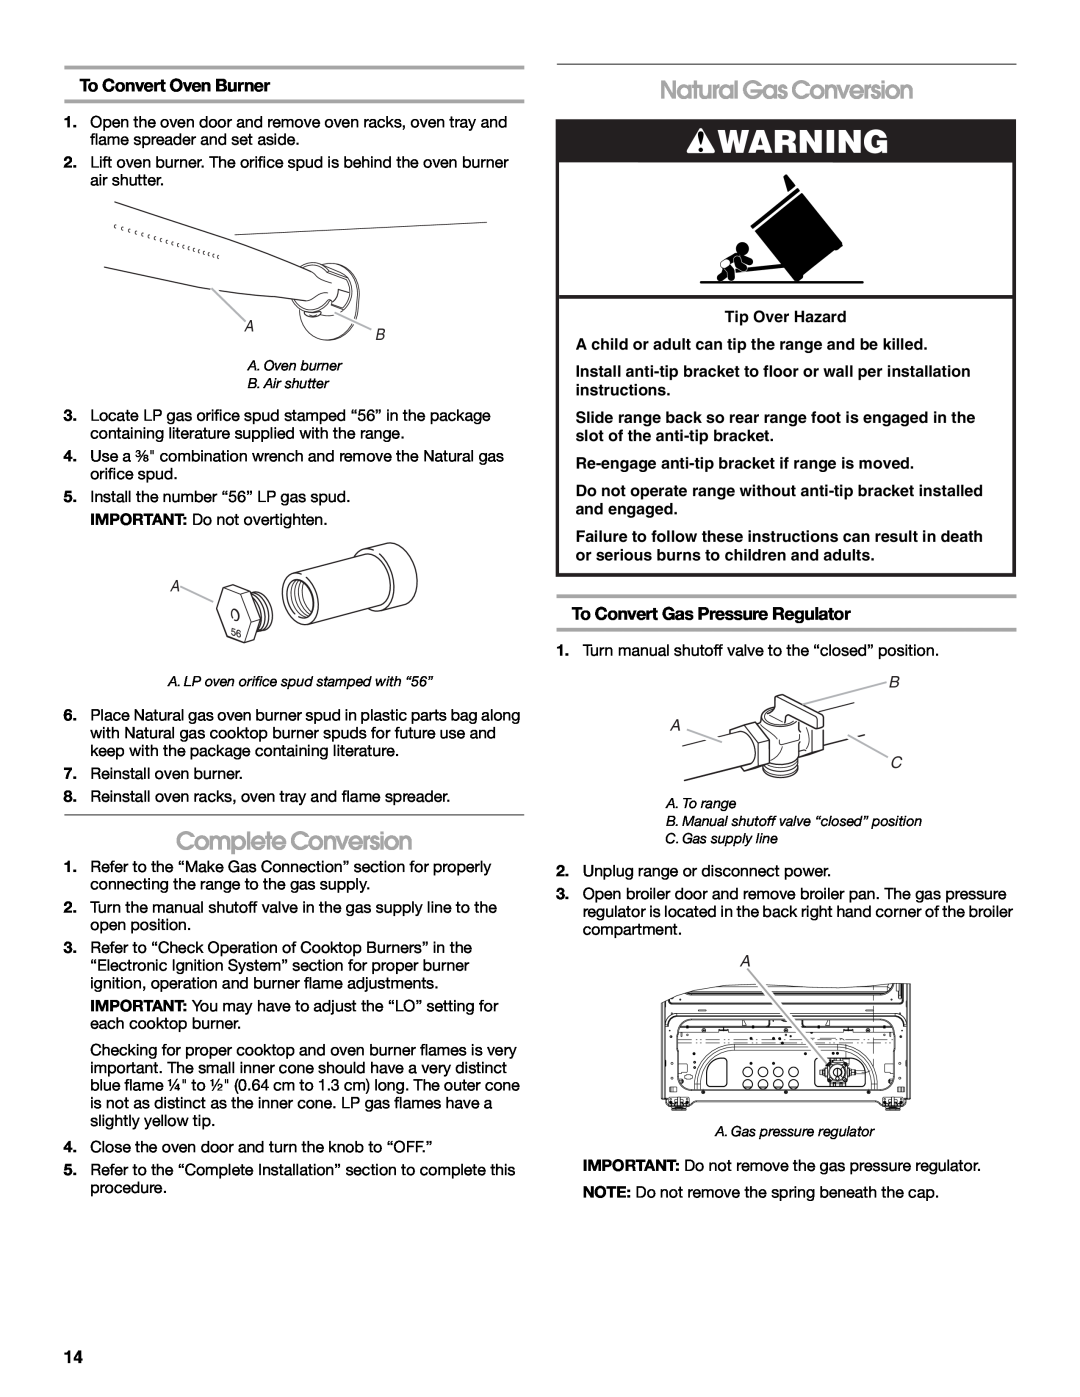 Whirlpool W10477533B installation instructions Complete Conversion, Natural Gas Conversion, To Convert Oven Burner, B A C 